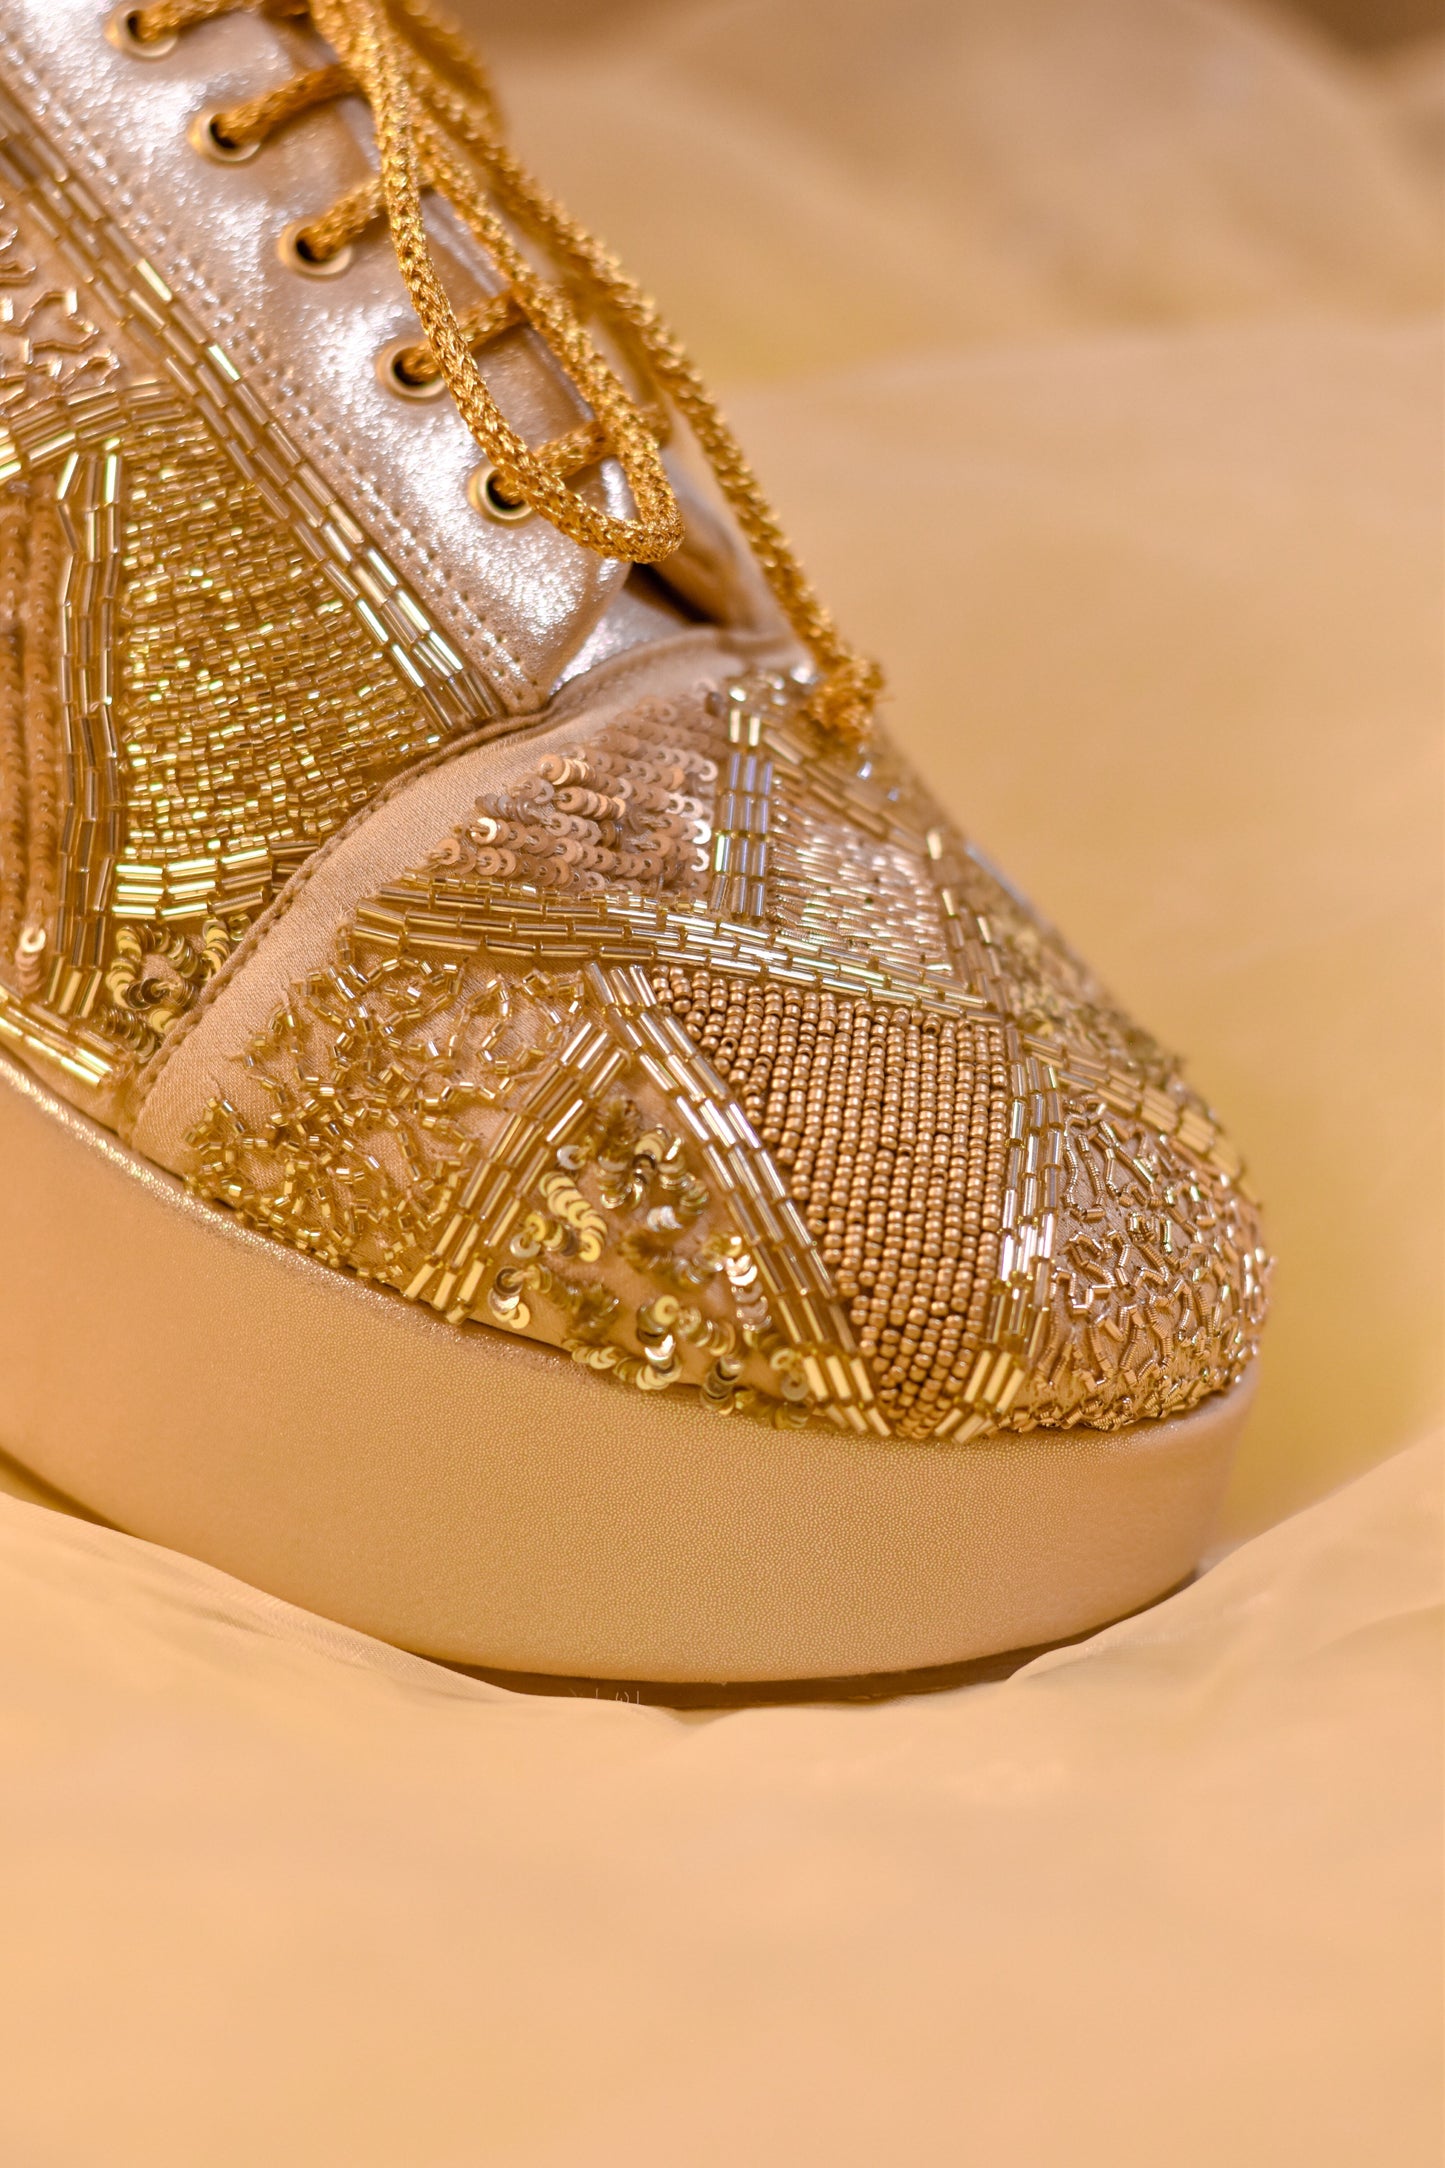 Golden trendy party sneakers for brides and bridesmaids